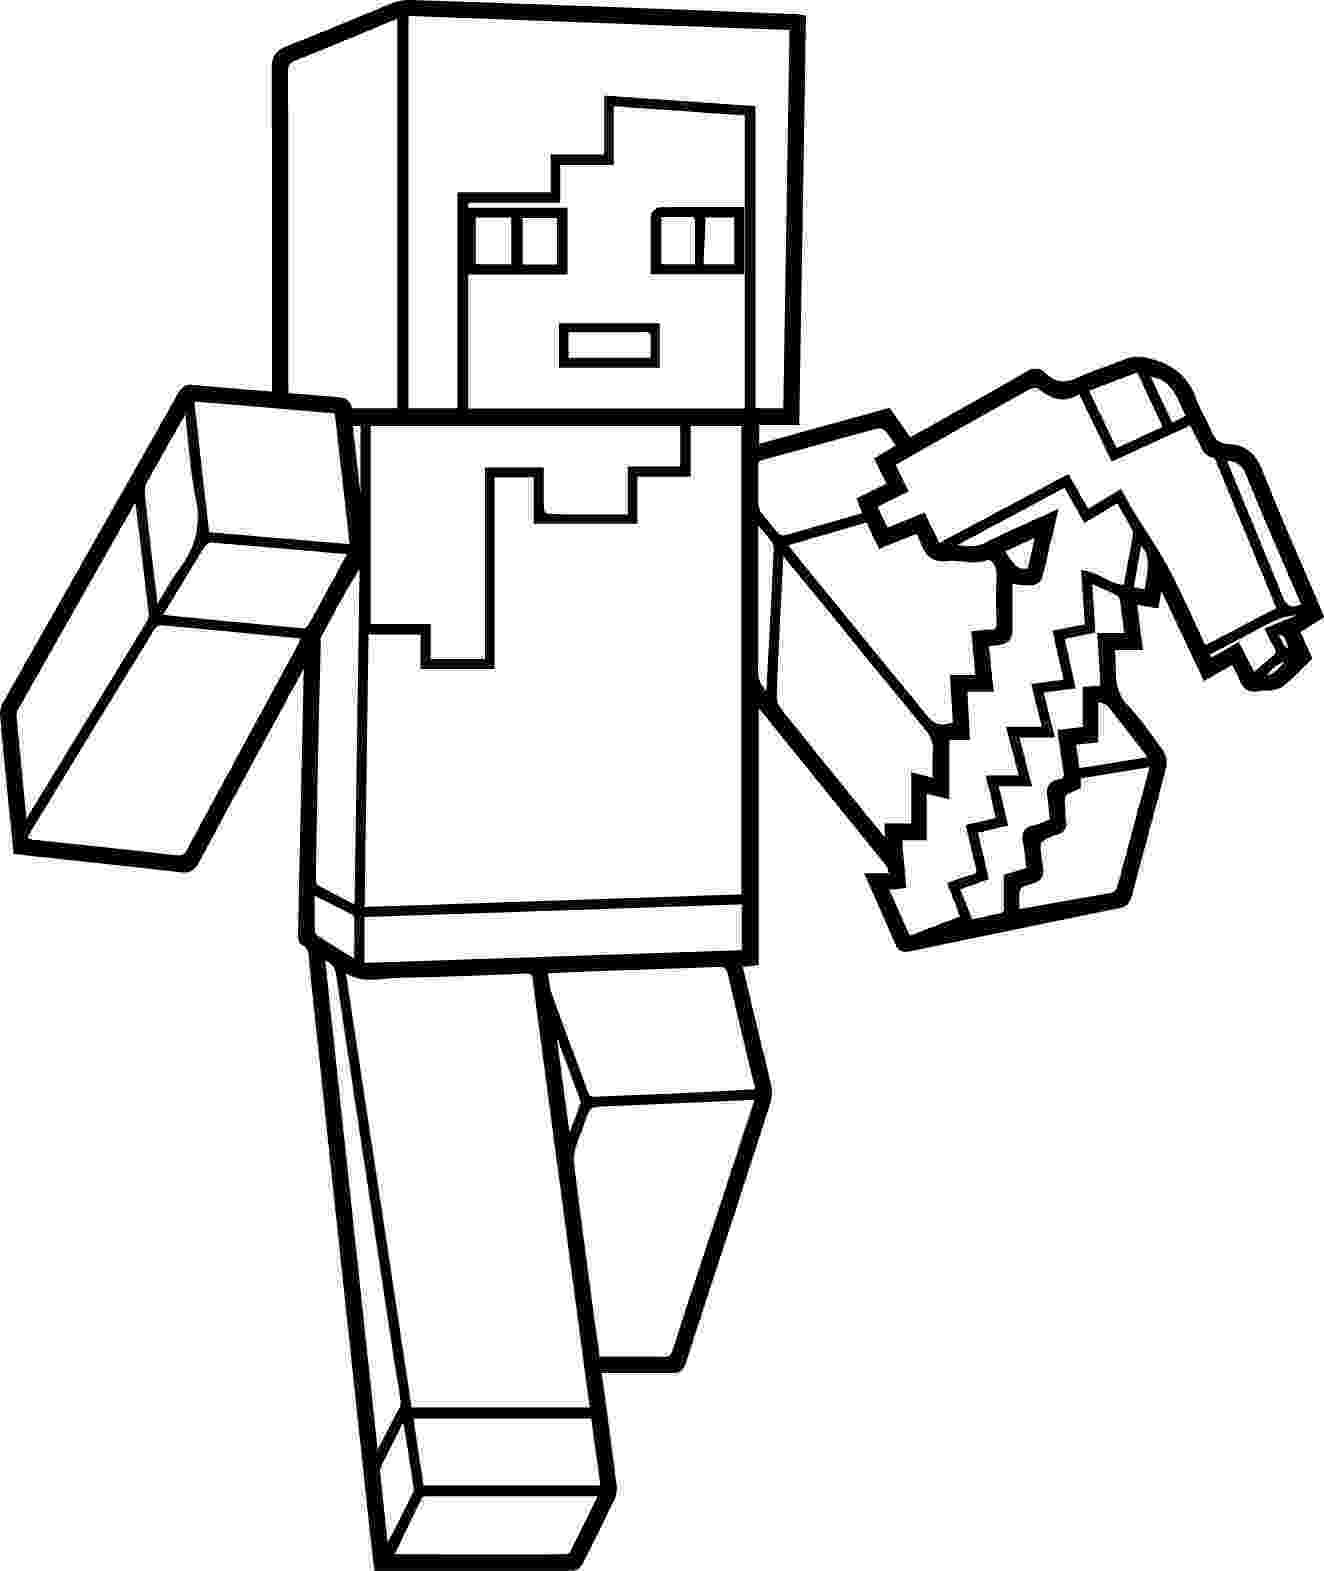 minecraft to color 17 best images about mine värityskuvia on pinterest to color minecraft 